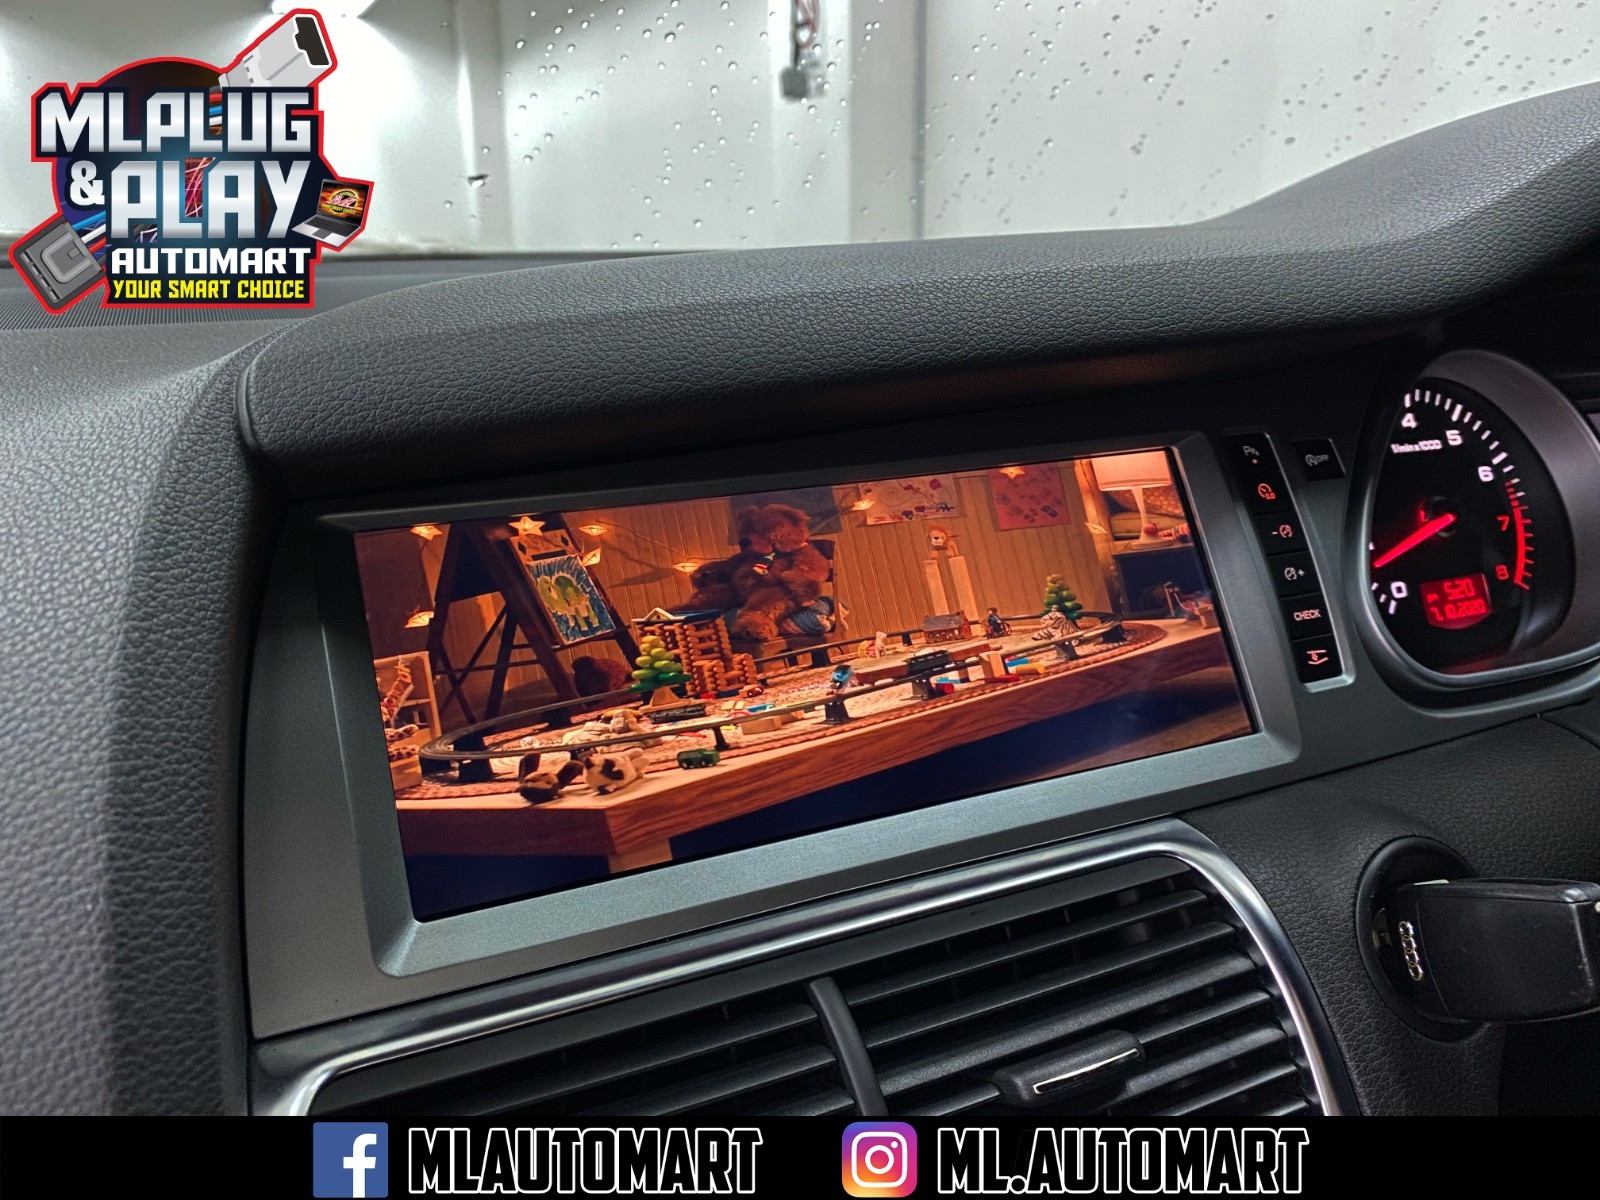 Audi Q7 Android Monitor